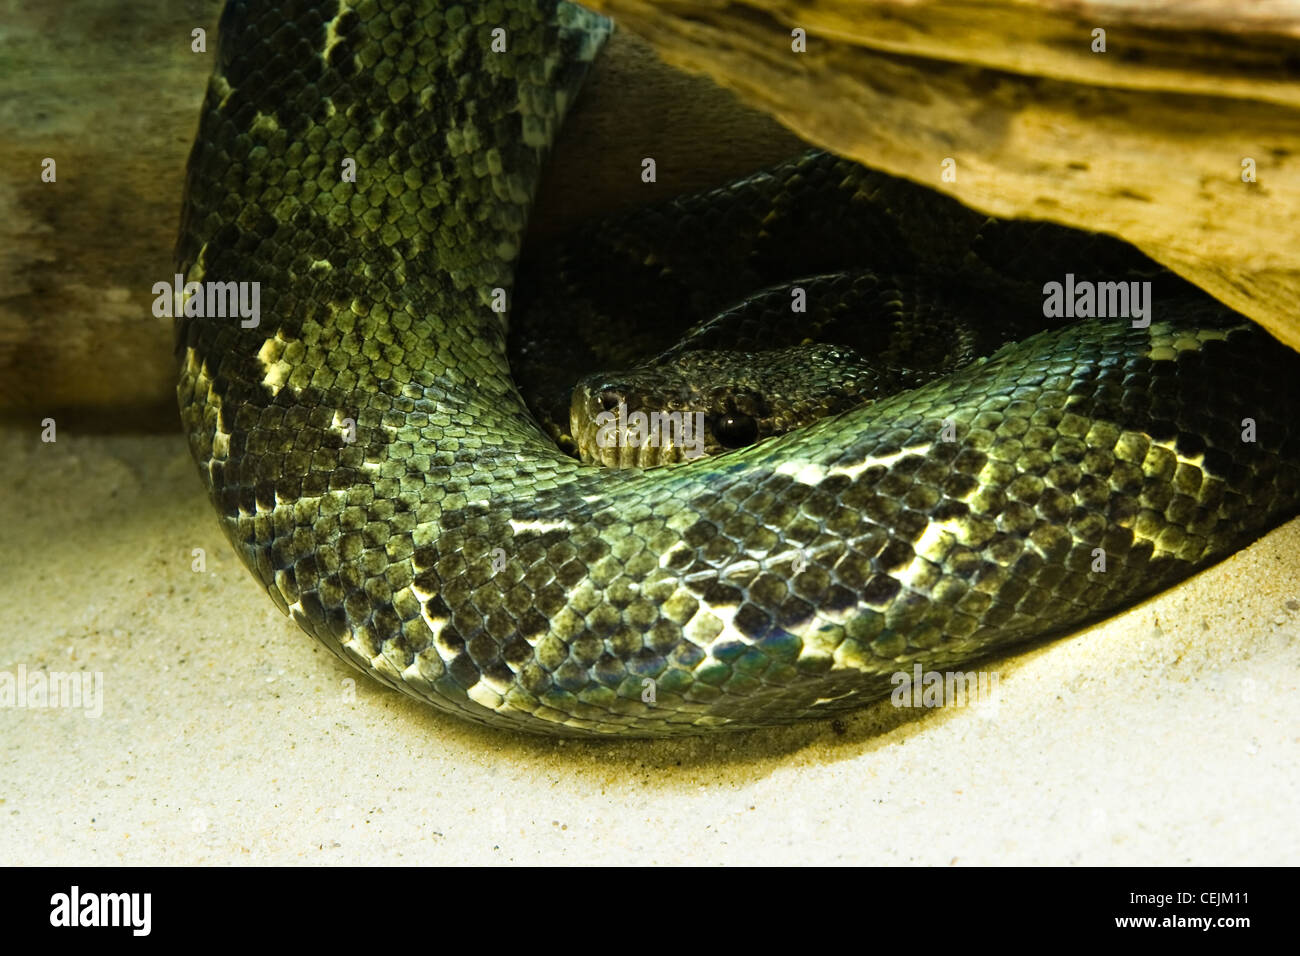 Python - green snake - resting and looking Stock Photo